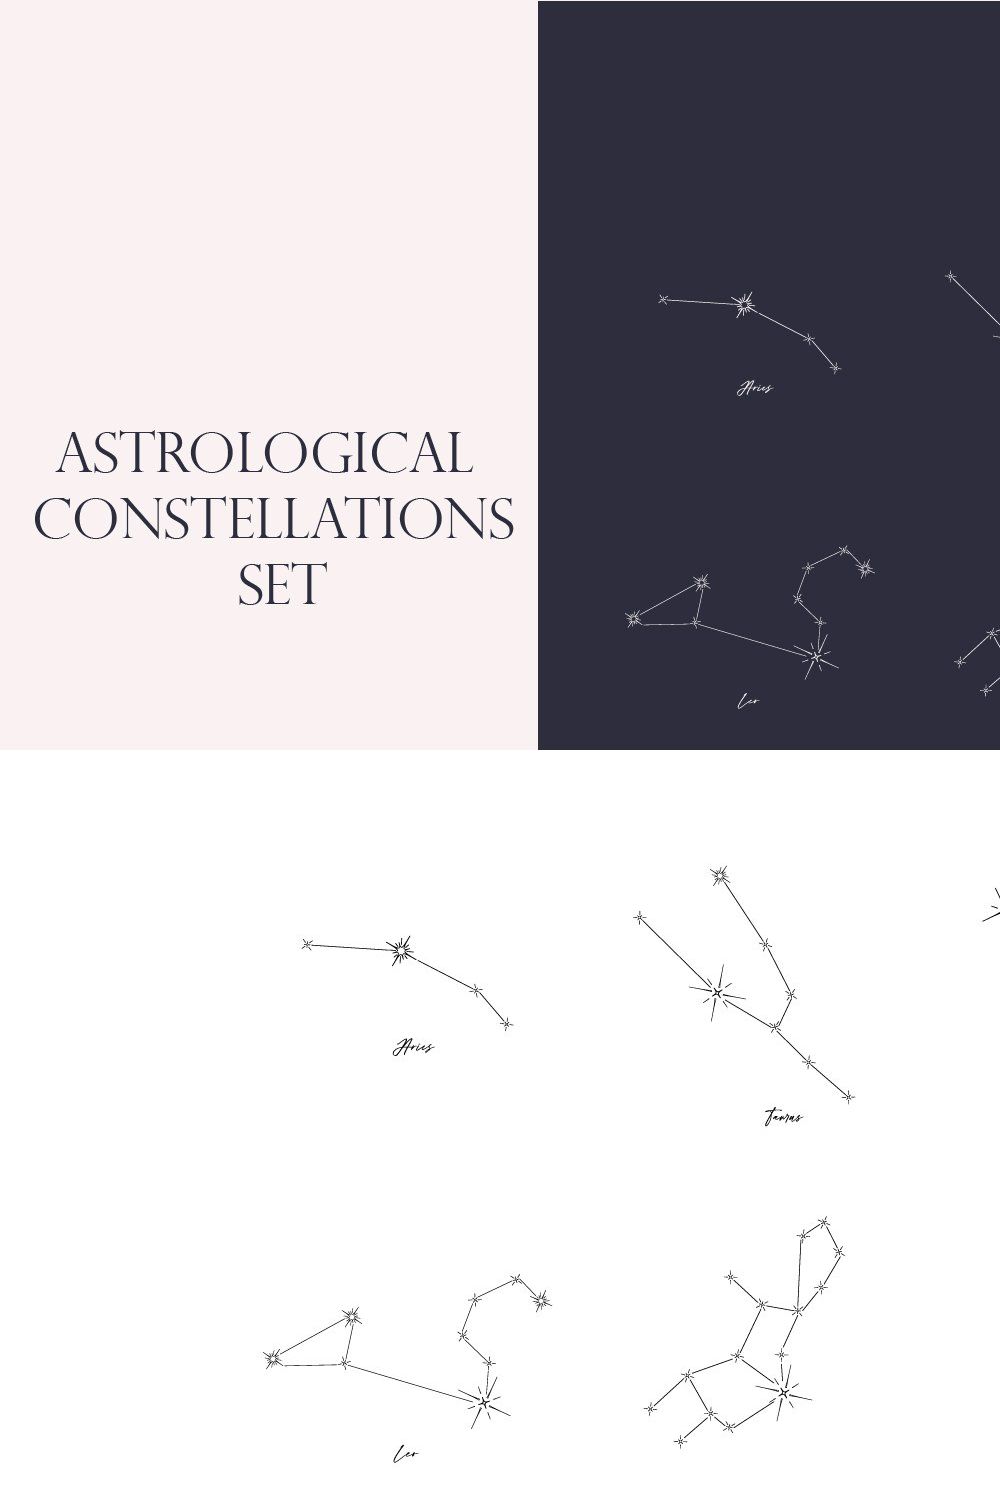 Astrological constellations set pinterest preview image.